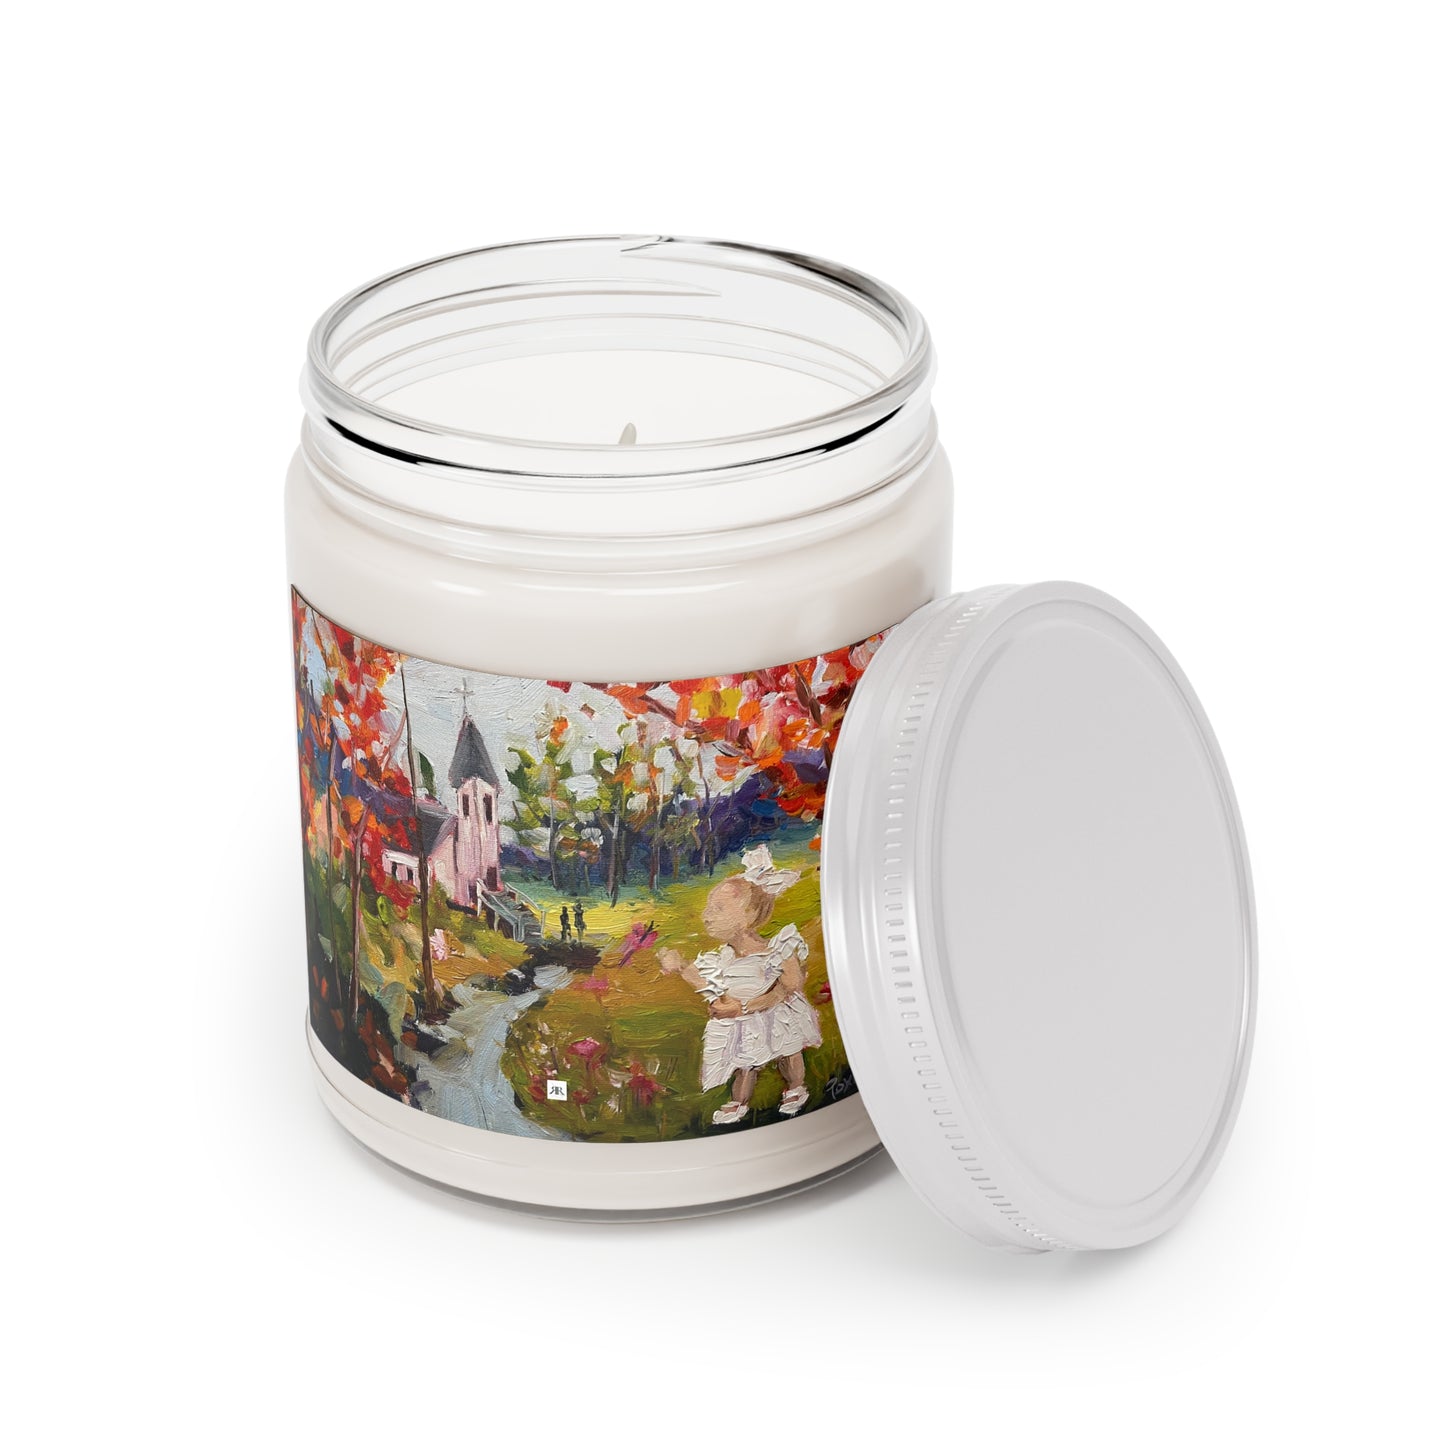 Isla at the Baptism (Rural Church landscape with Toddler) Scented Candle 9oz